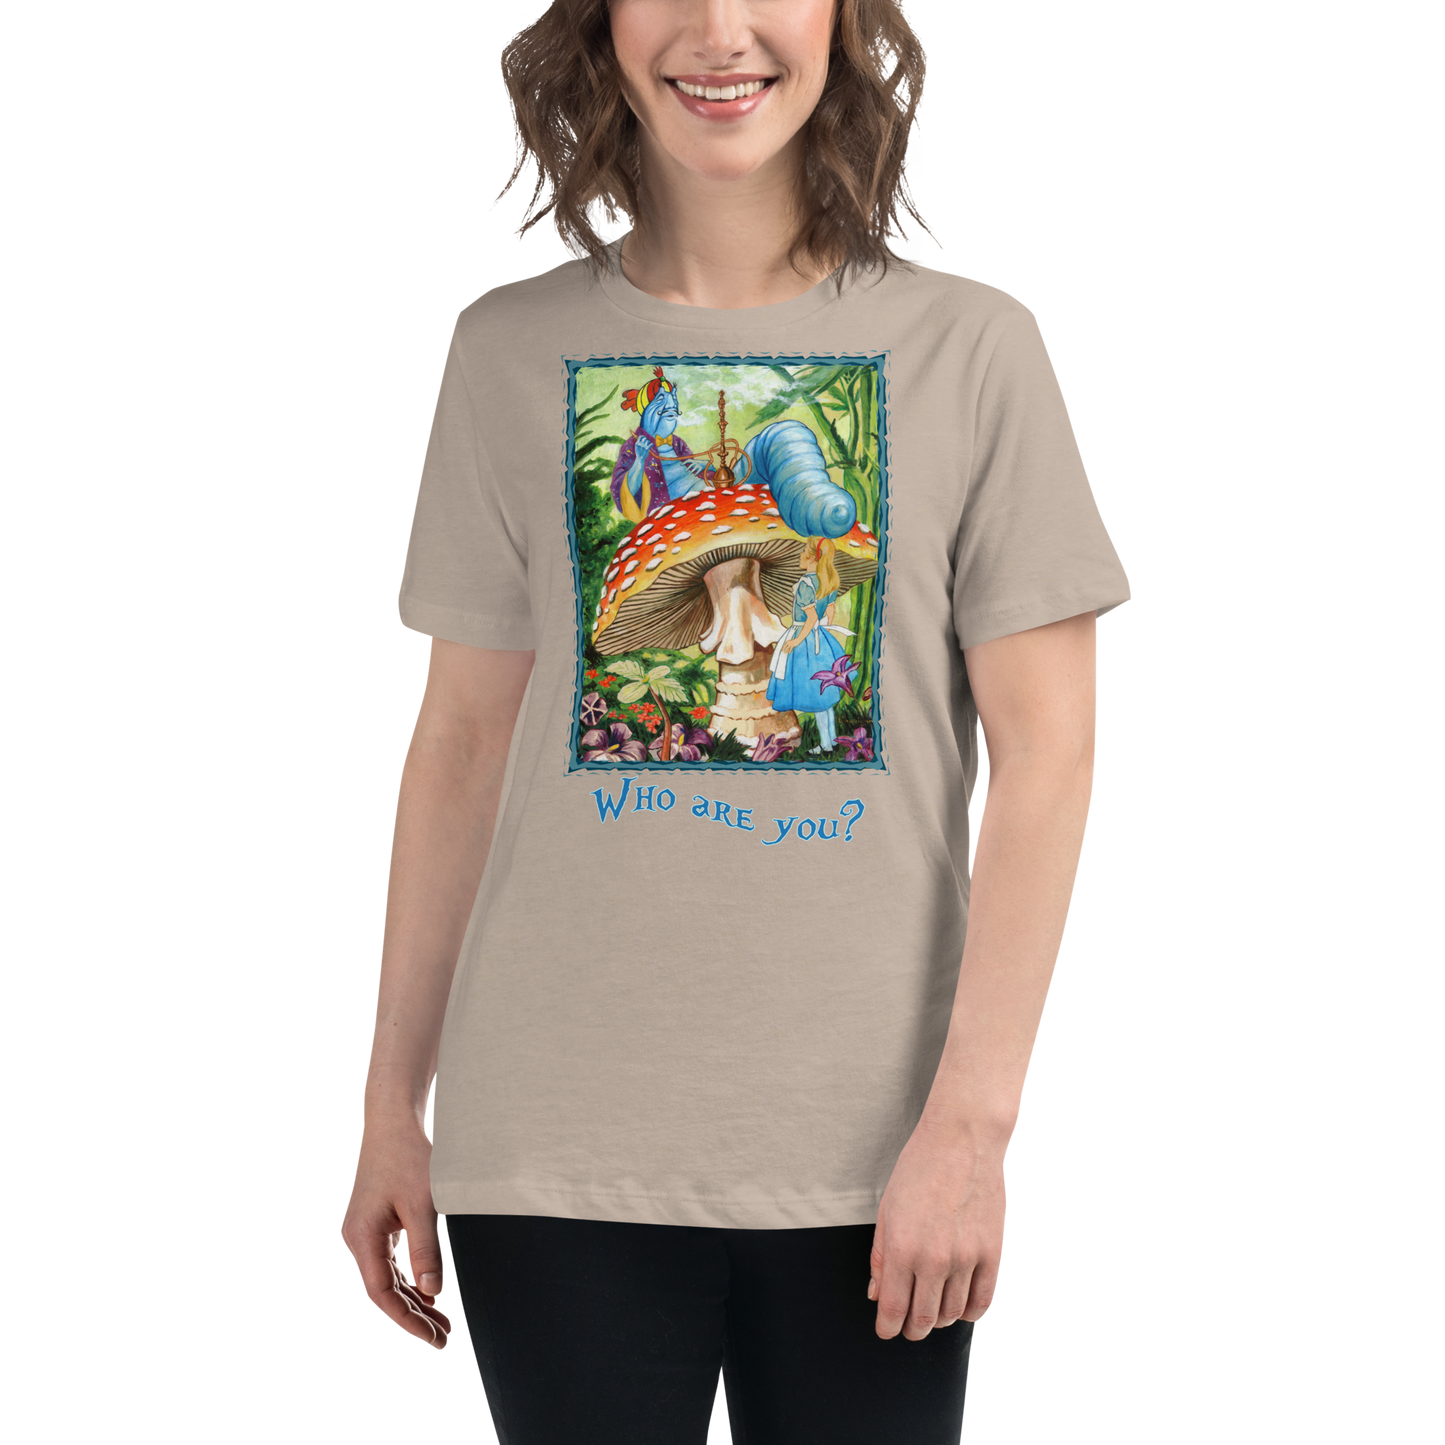 Alice & the Hookah-smoking Character - Women's Relaxed T-Shirt